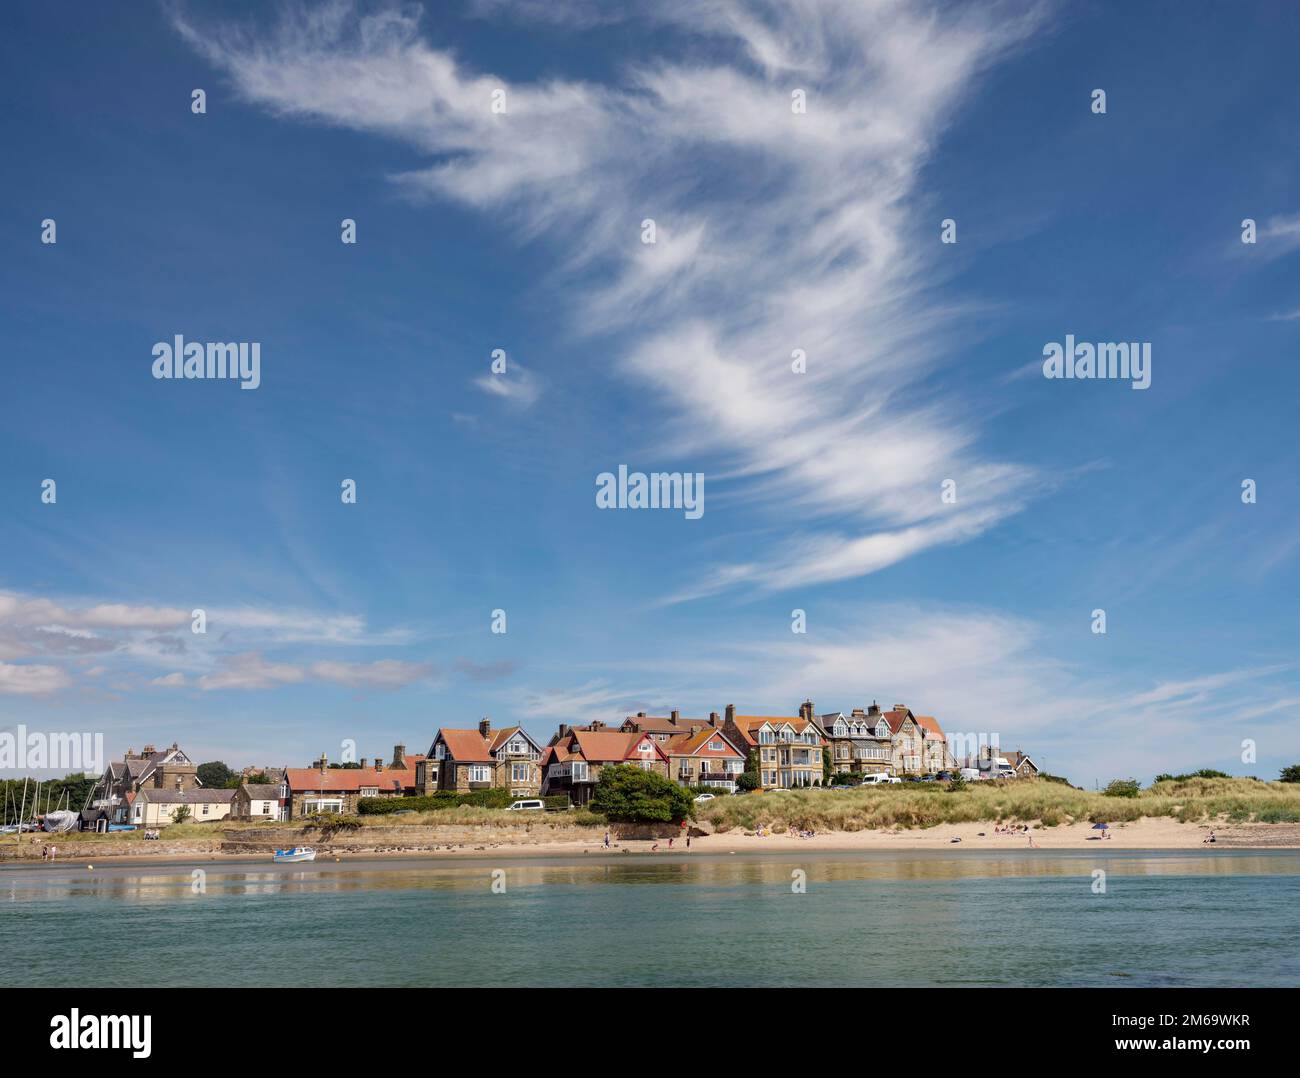 The village of Alnmouth reflected in the waters of the River Aln on a summer afternoon, Northumberland, England Stock Photo